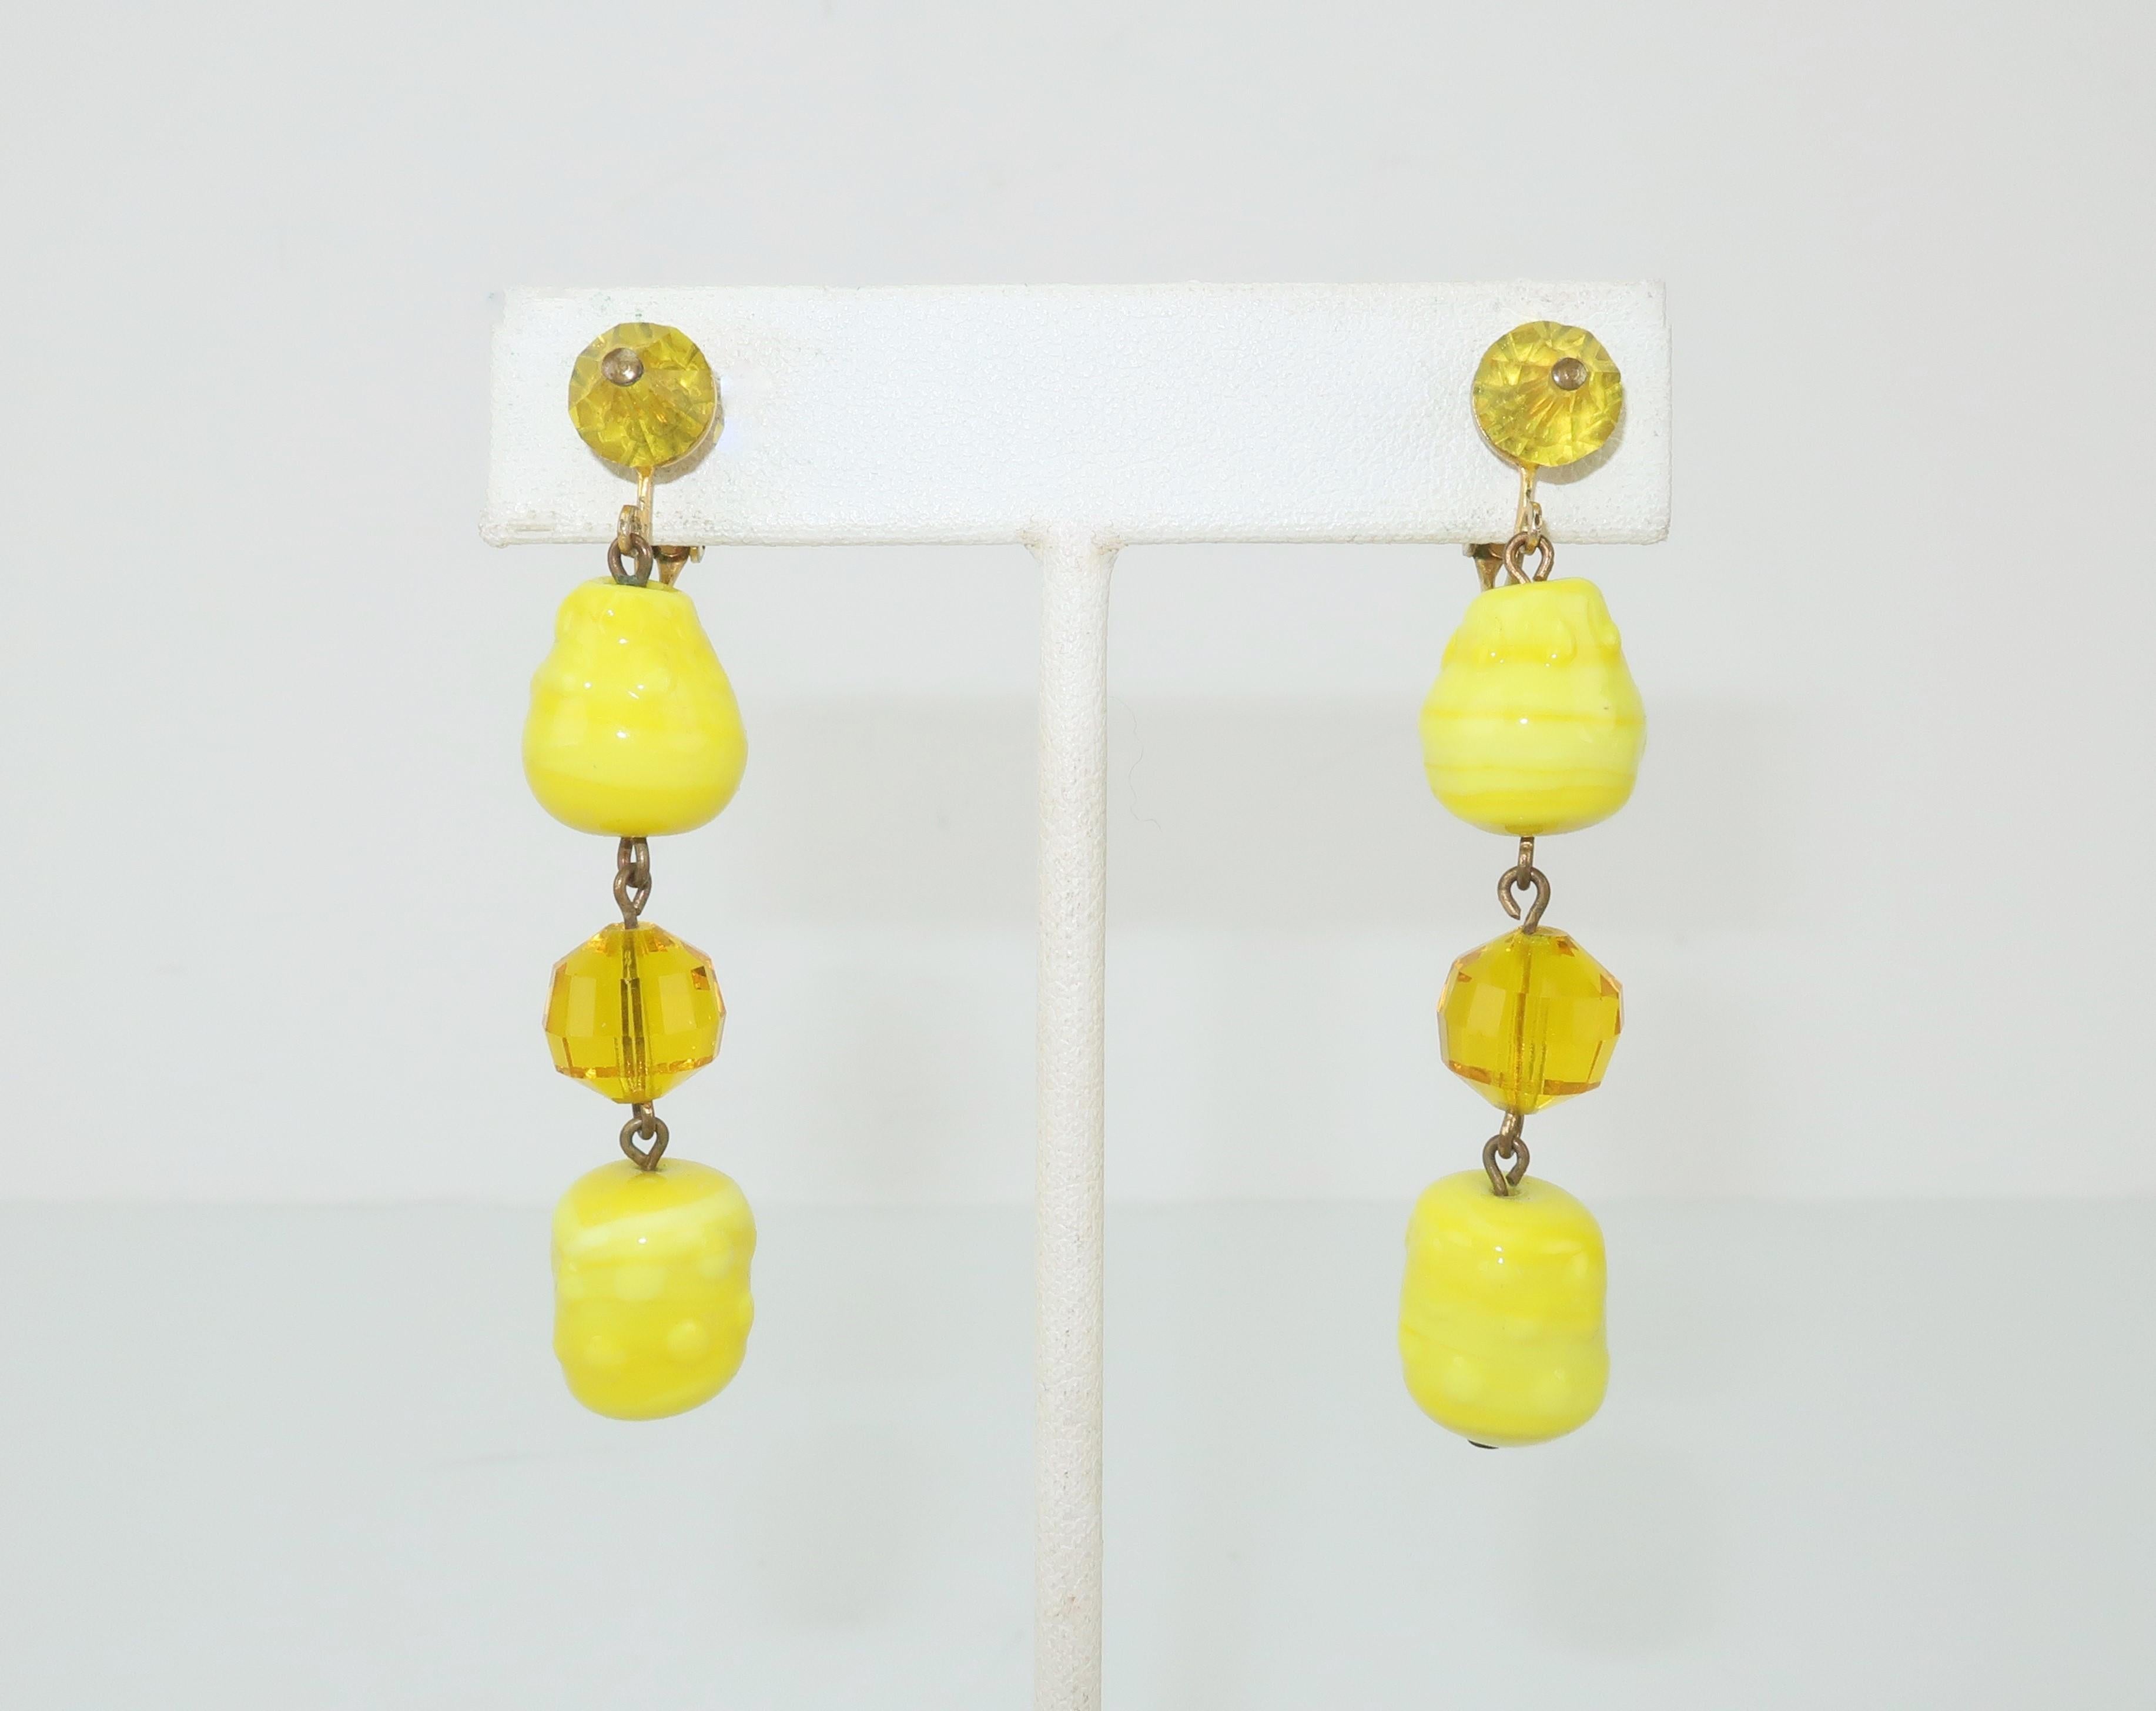 These C.1960 Vogue Jewelry earrings consist of articulated bright yellow and faceted amber glass beads with comfortable clip on hardware.  The dangling movement and pop color are period perfect details for adding a fun sixties vibe to your look. 